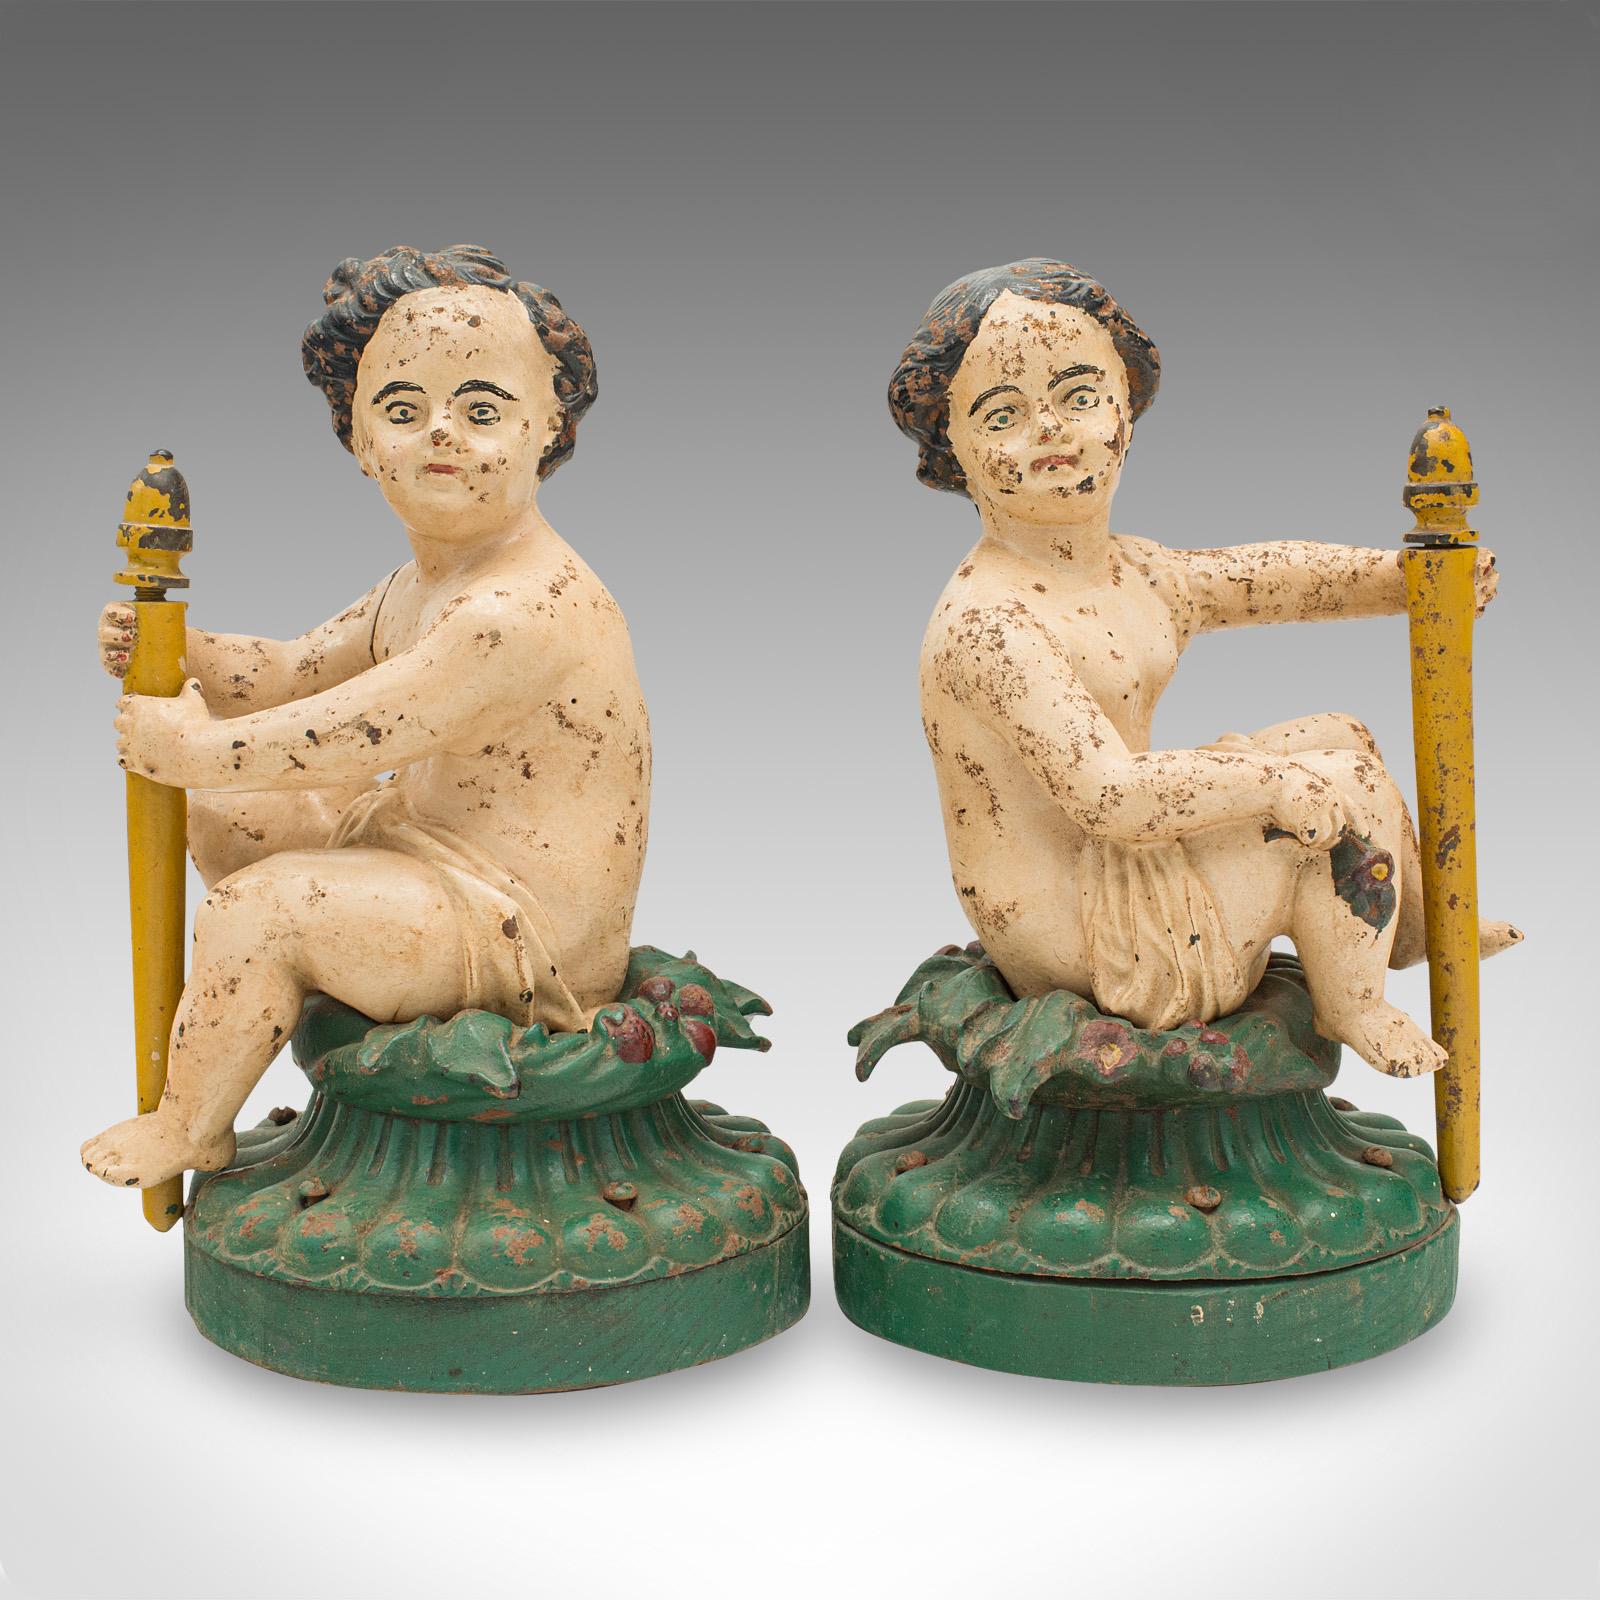 This is a pair of antique decorative figures. An English, painted cast iron putto on elm base, dating to the Victorian period, circa 1870.

Delightfully unusual figures with Rubenesque appeal
Displaying a desirably aged patina throughout
Substantial